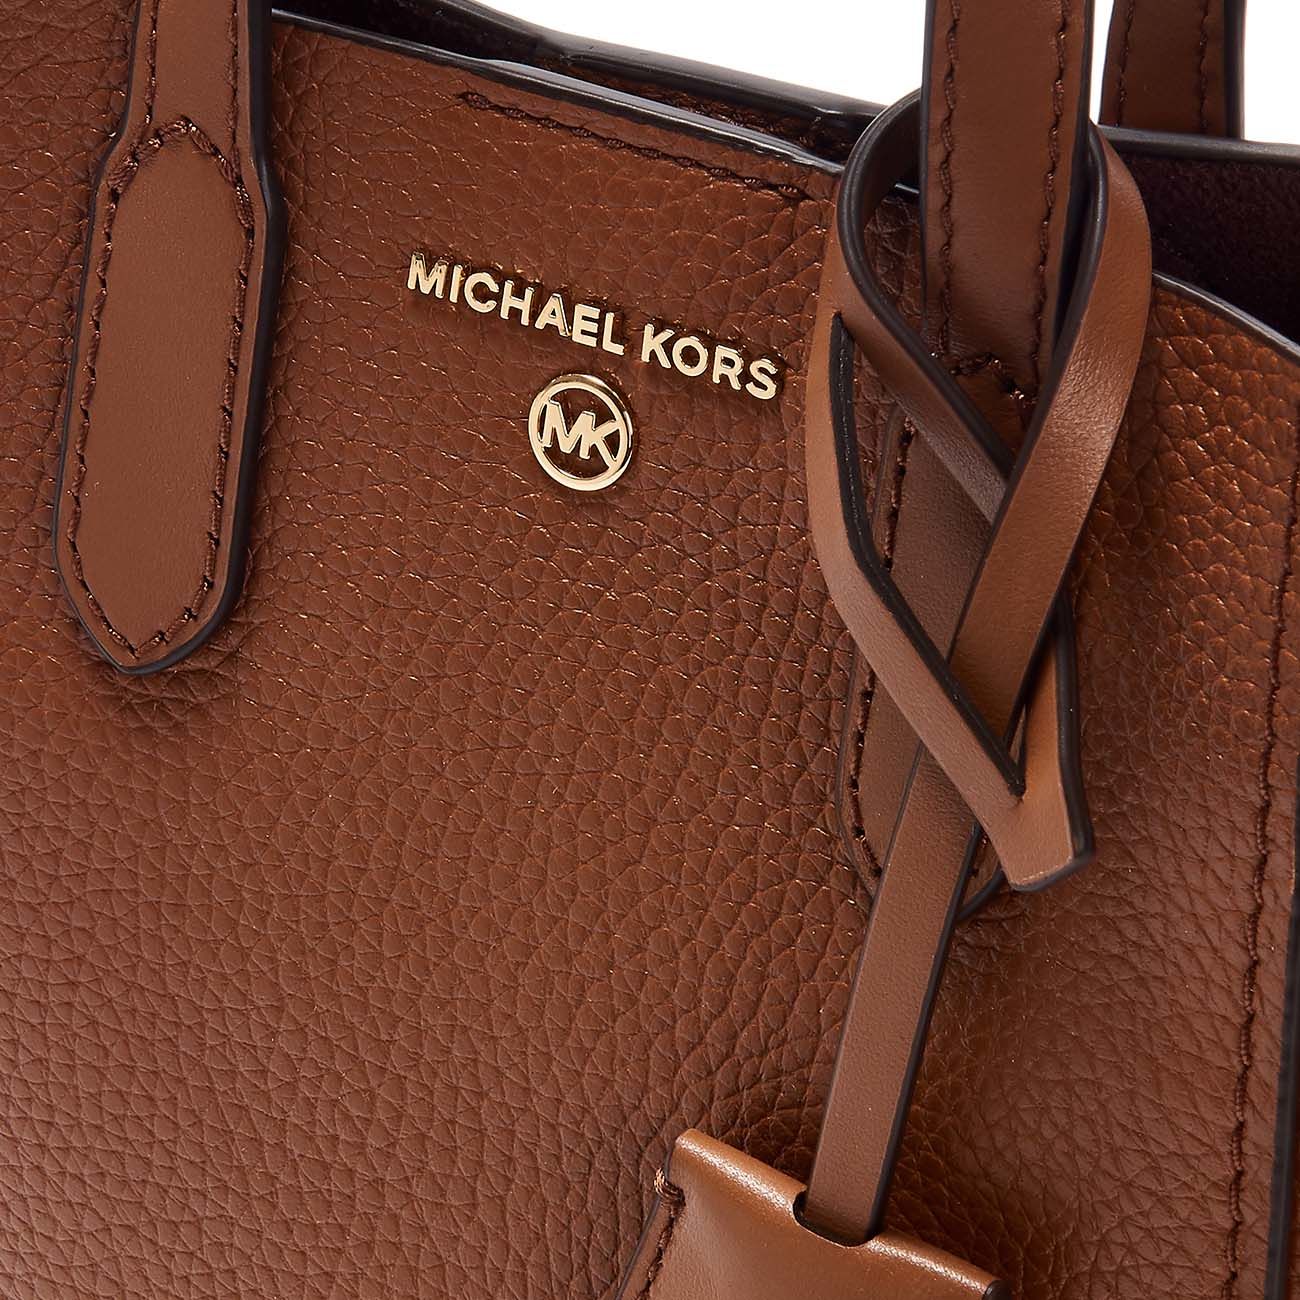 Michael Kors Black Friday 2021 sale get up to 40 off bags